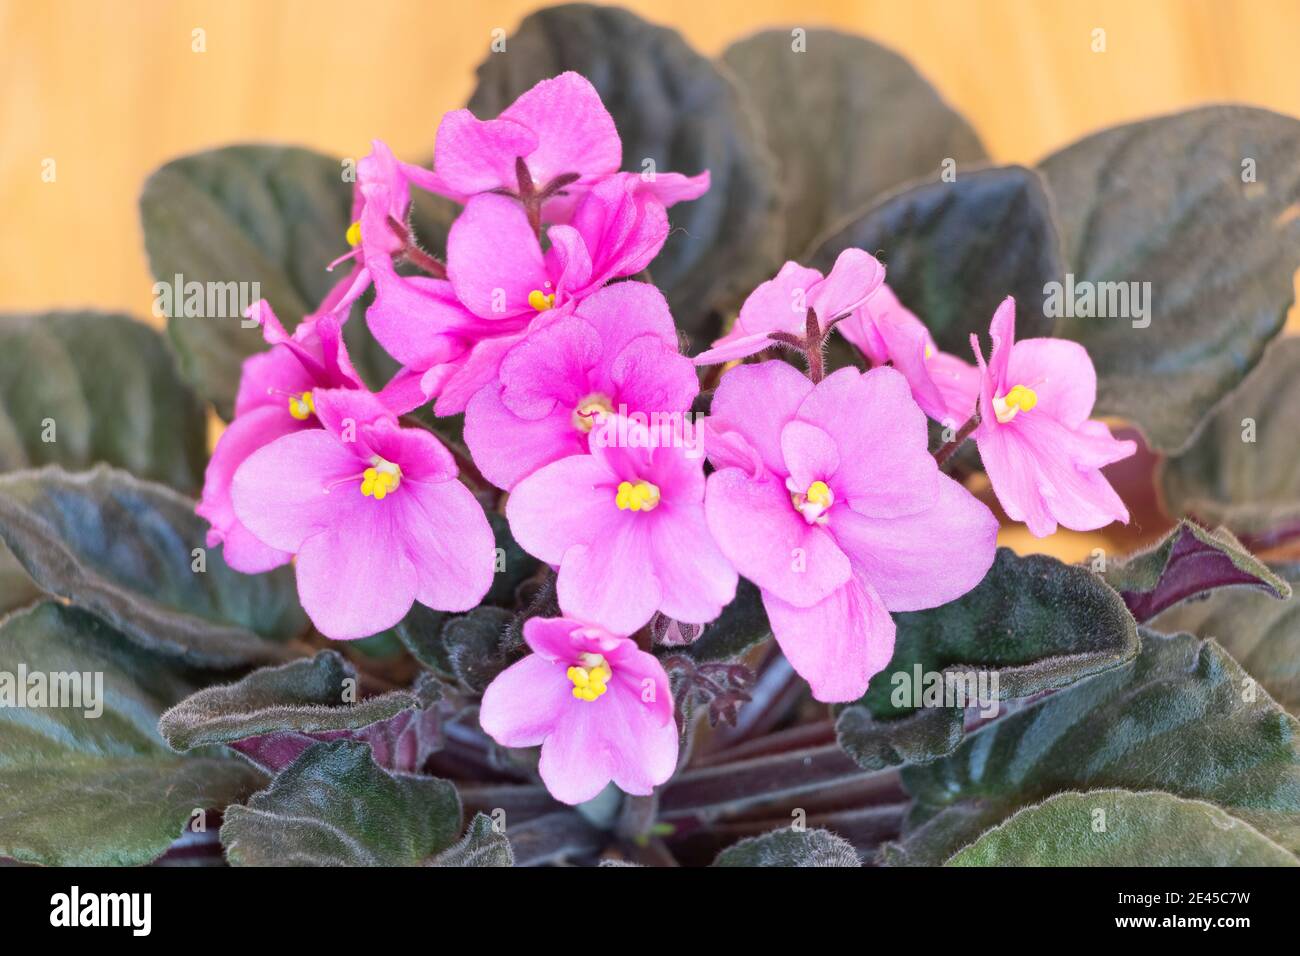 Beautiful African violet with pink flowers close up. How to grow African violets at home concept Stock Photo